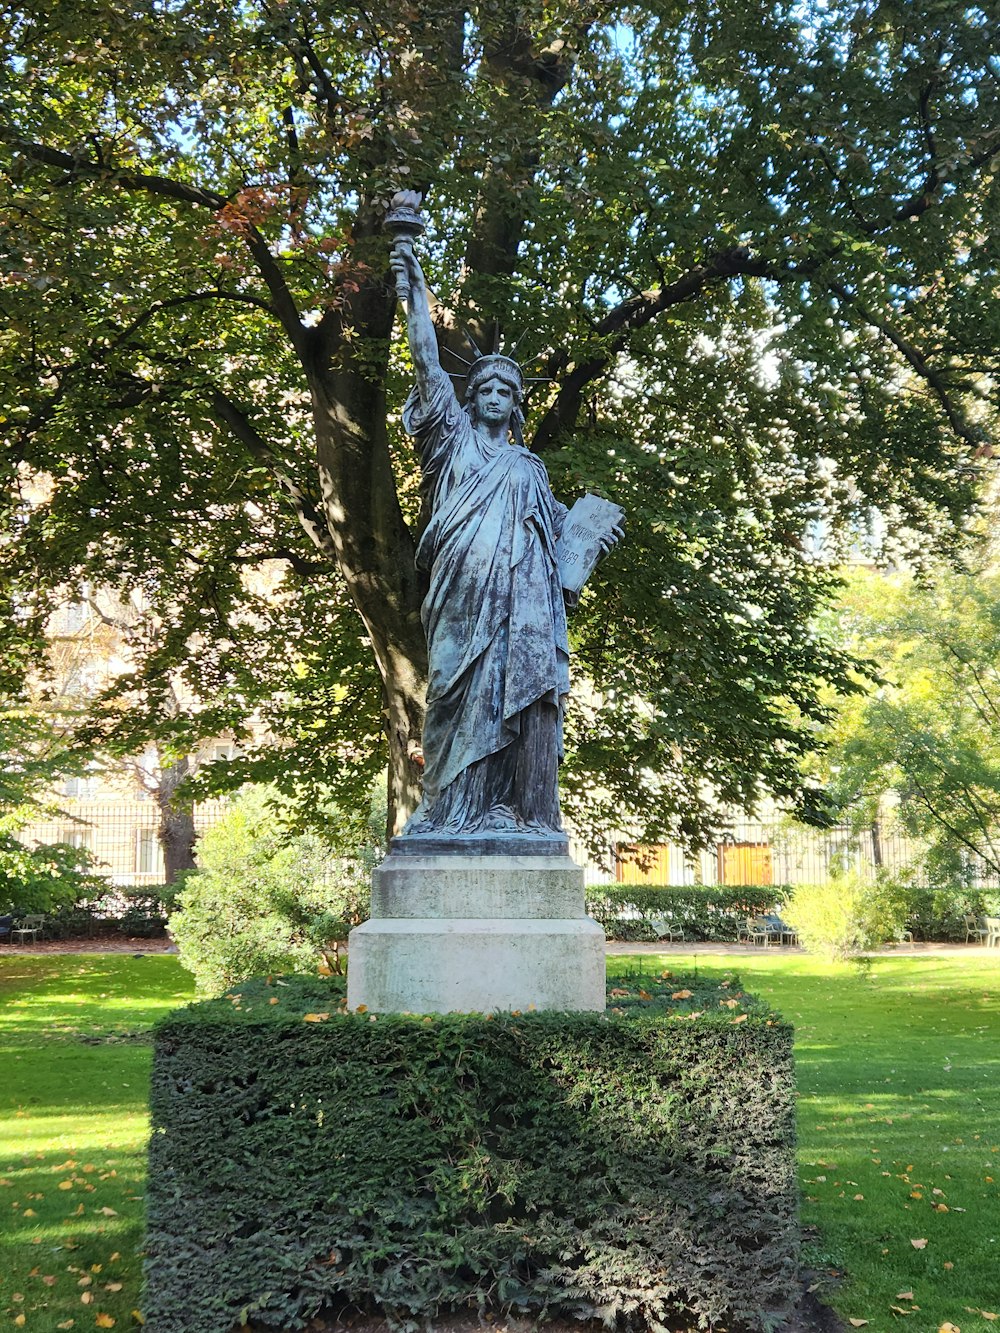 a statue of a person holding a torch